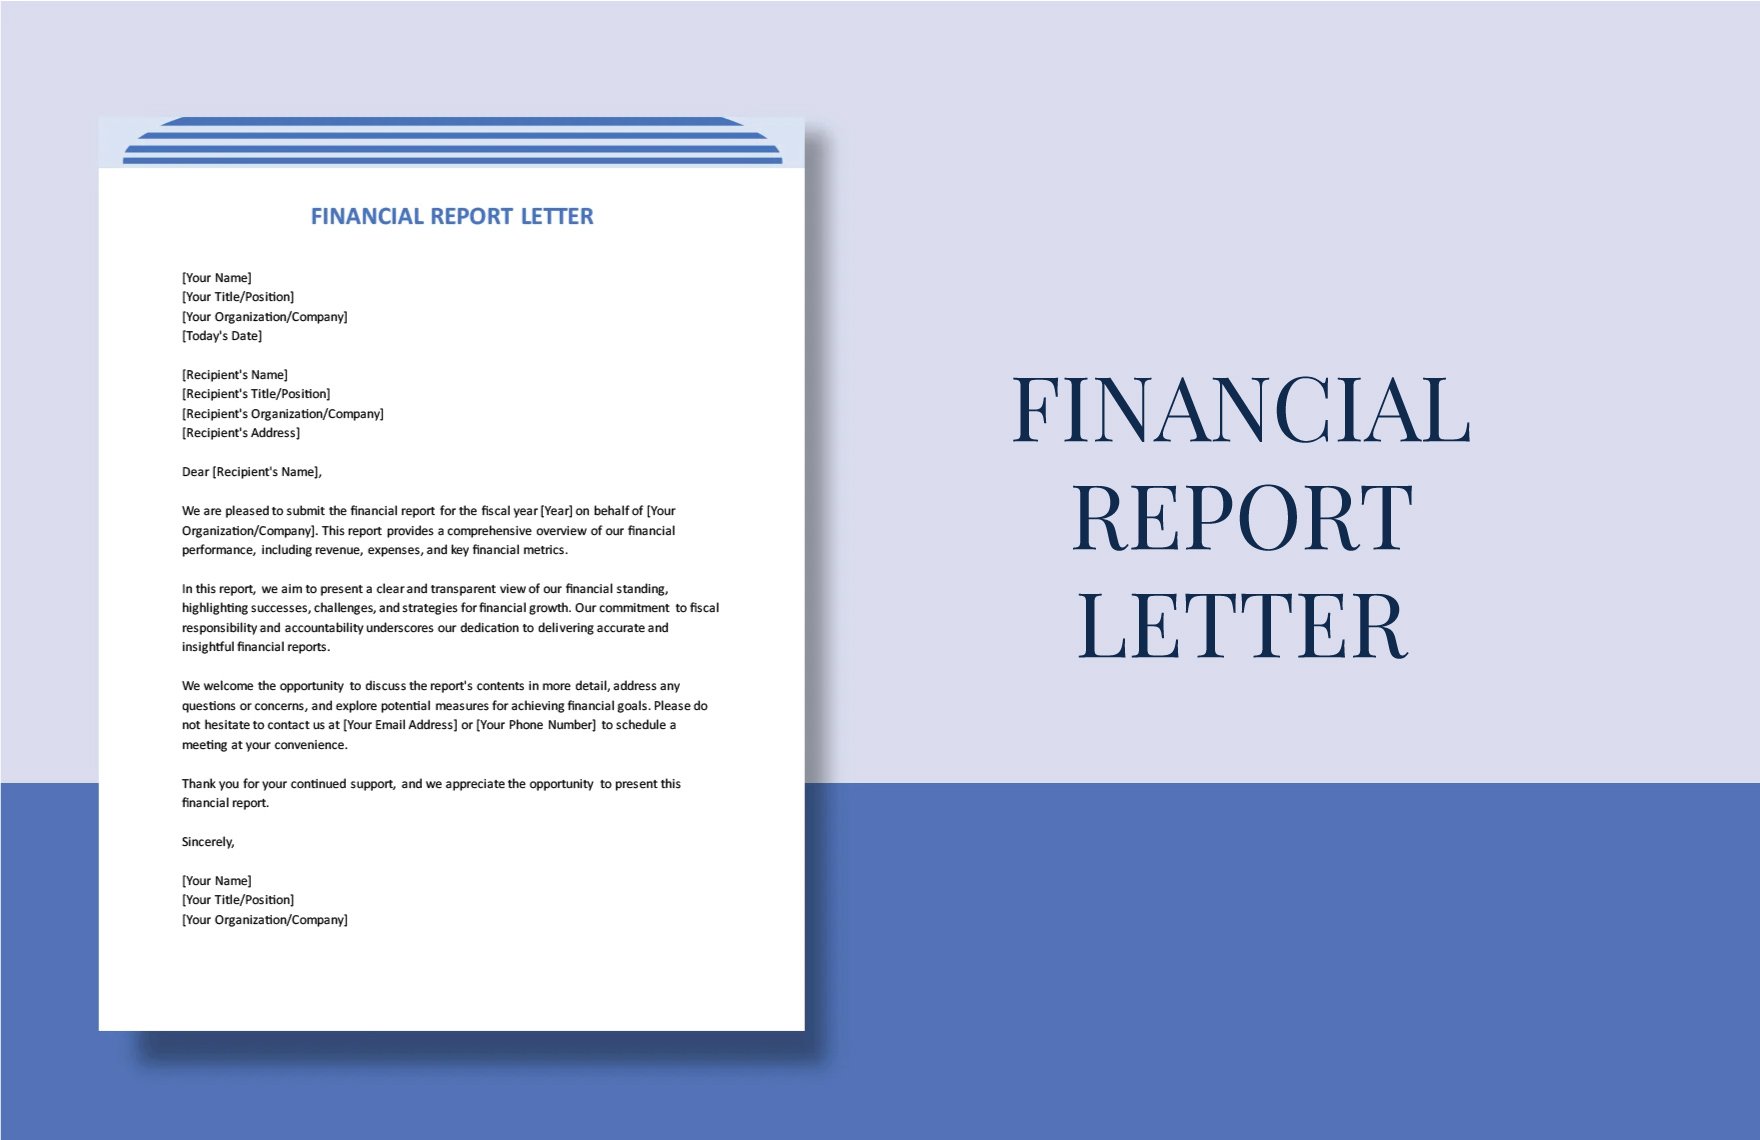 Financial Report Letter